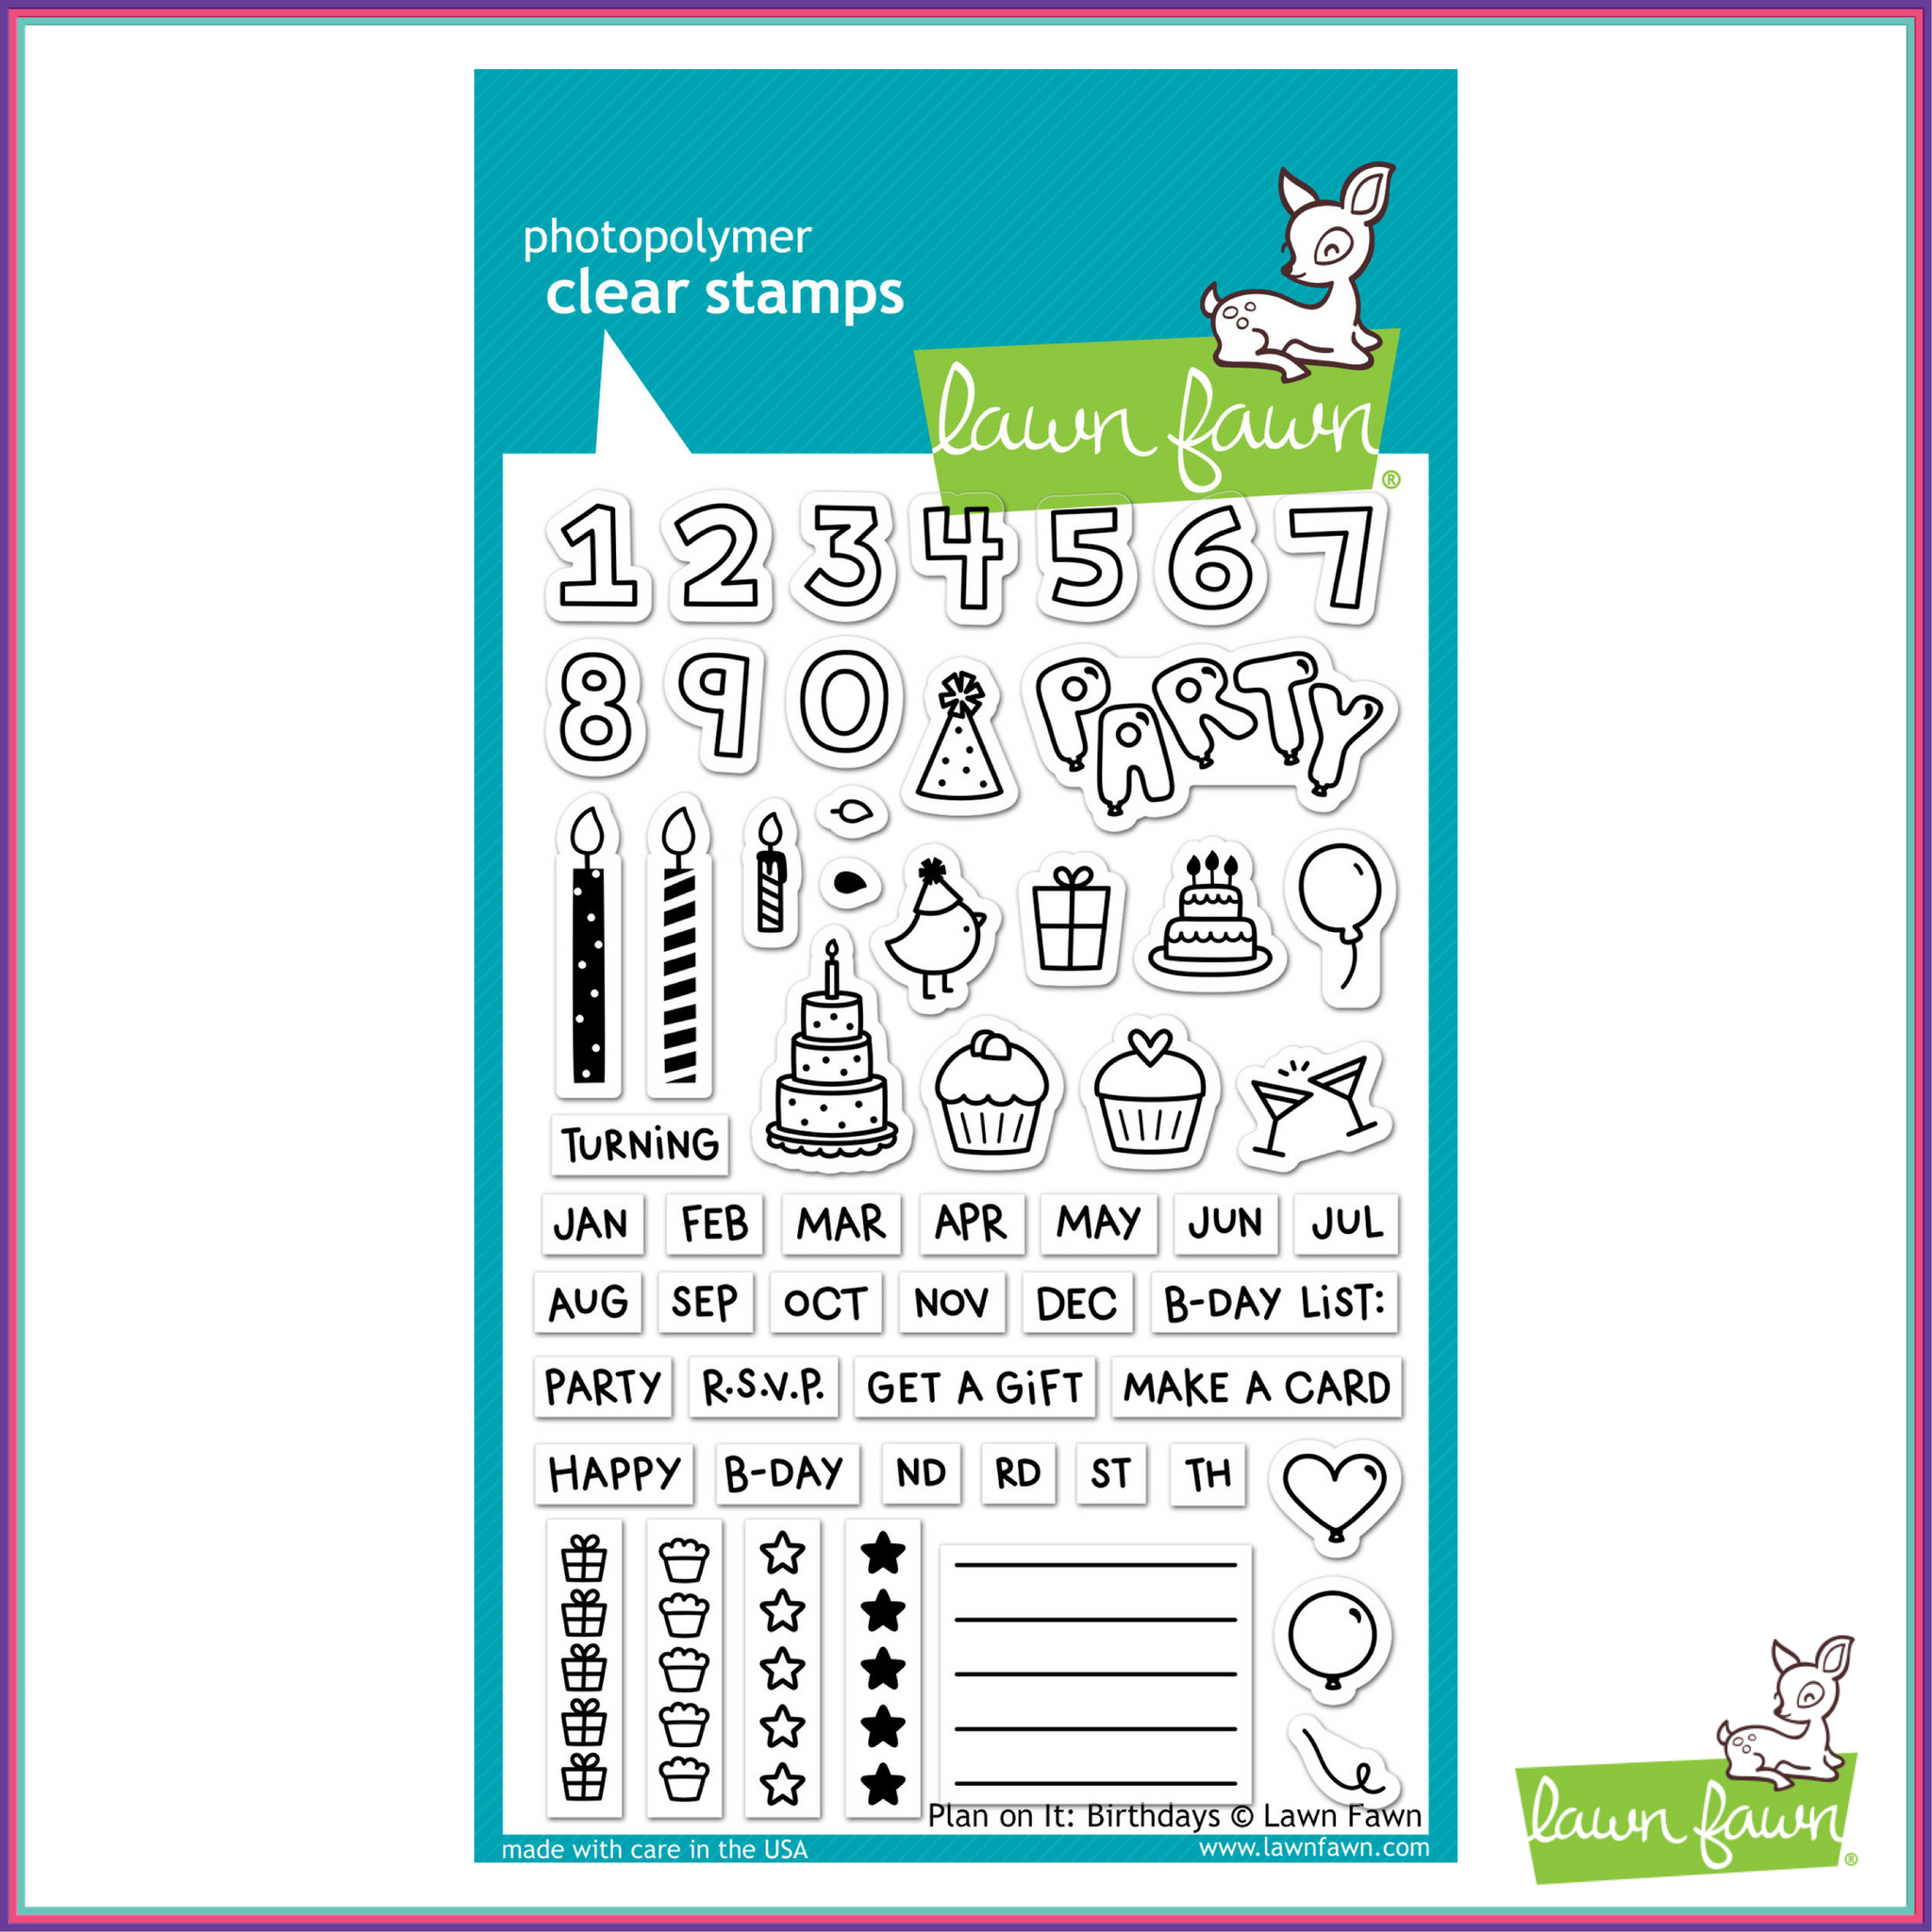 Lawn Fawn Plan On It: Birthdays Stamp Set - Stamps - Lawn Fawn - Orchids and Hummingbirds Designs, LLC